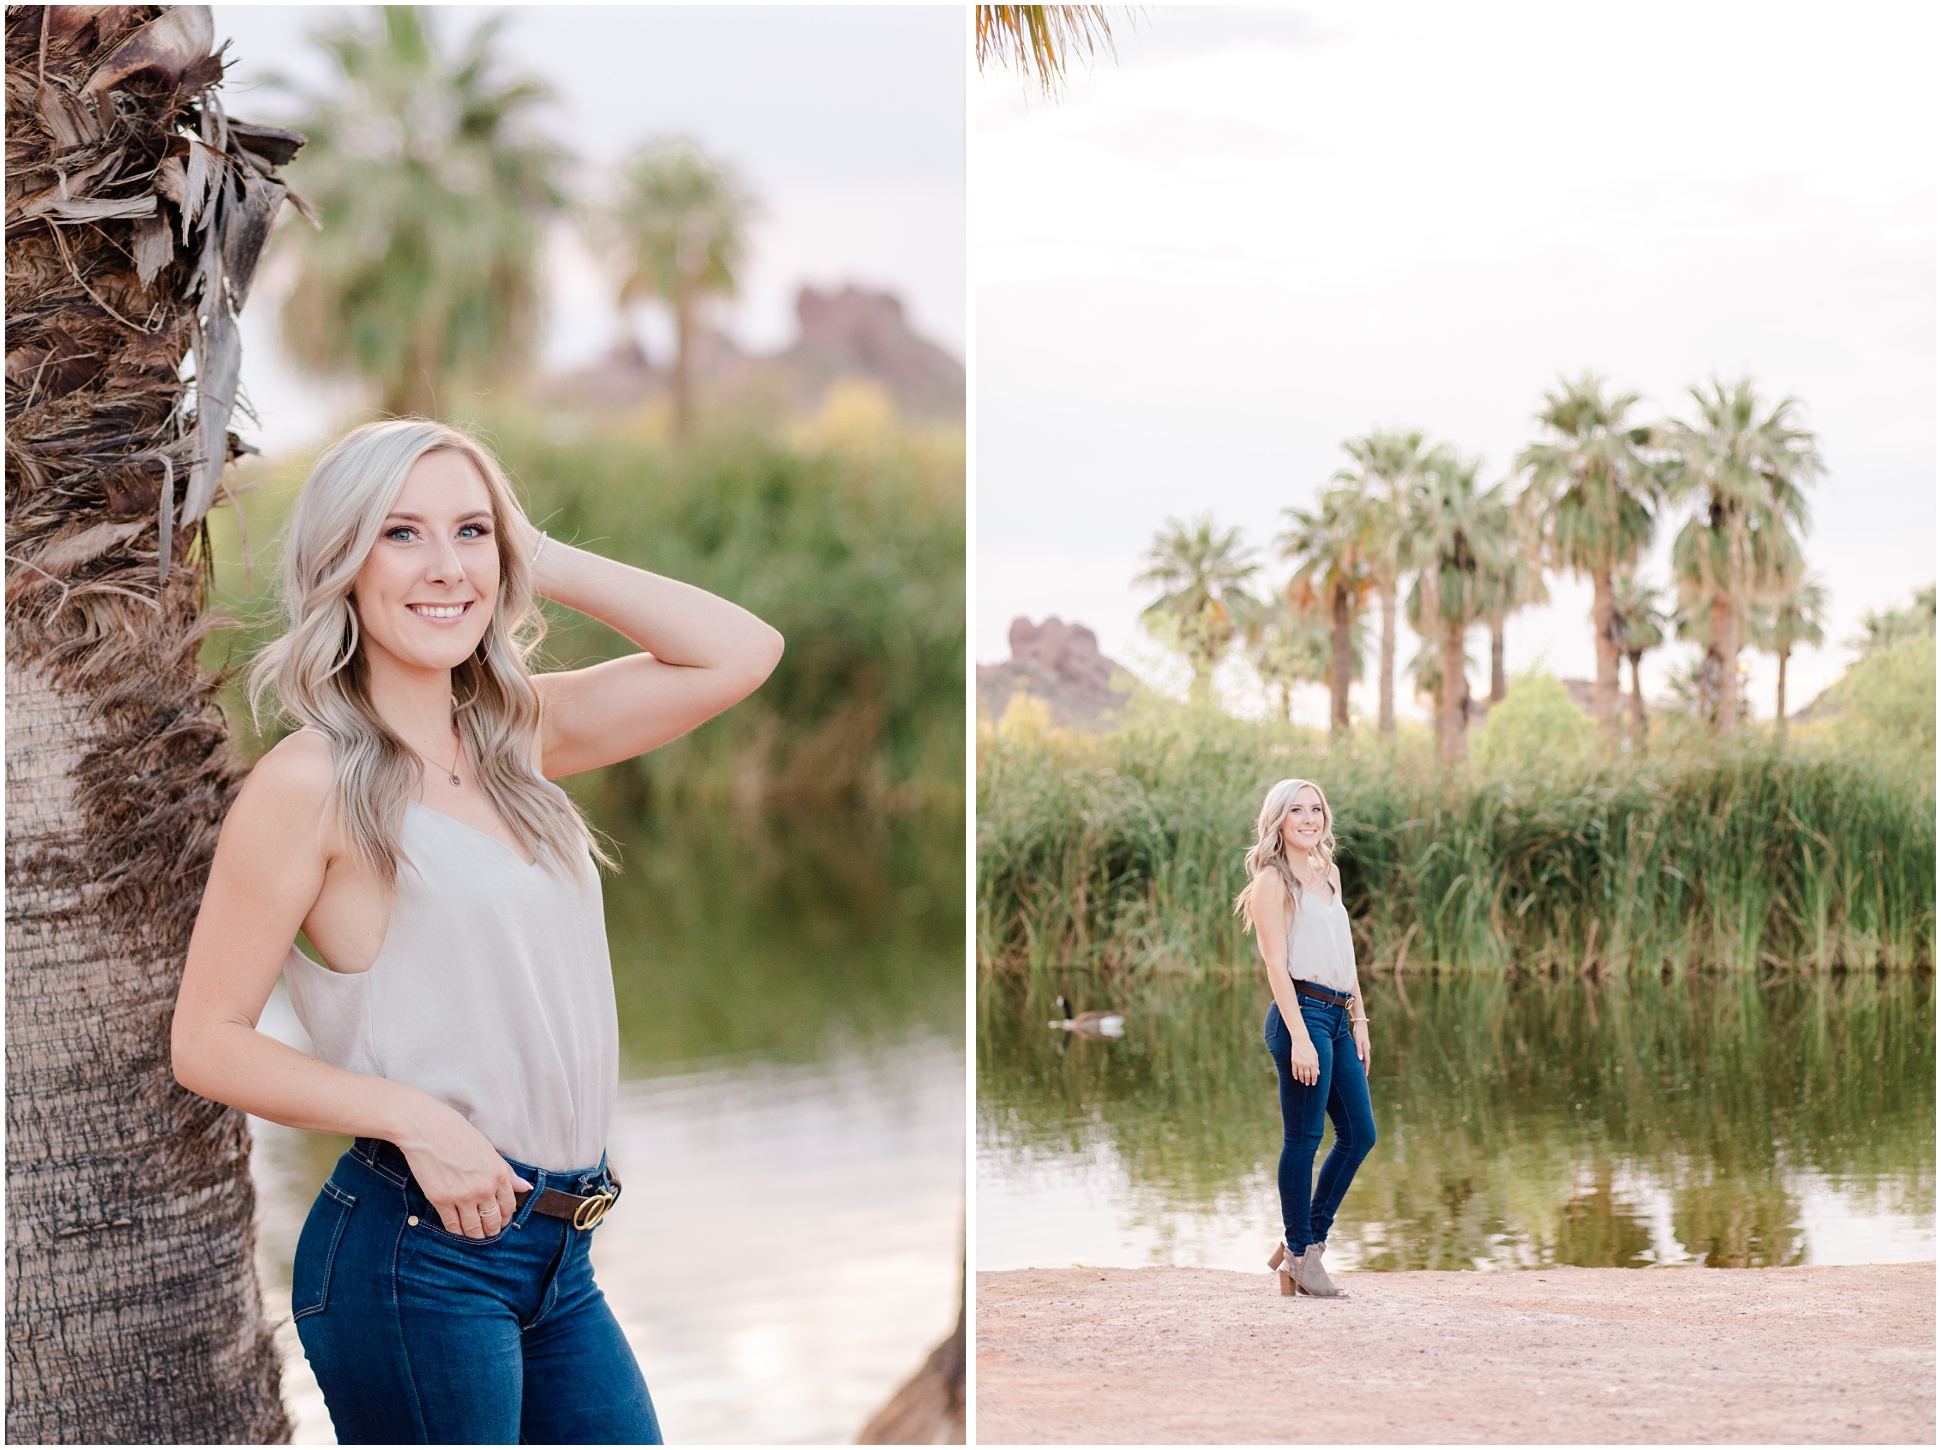 Two images of Kaitlynn's graduation senior session at Papago Park